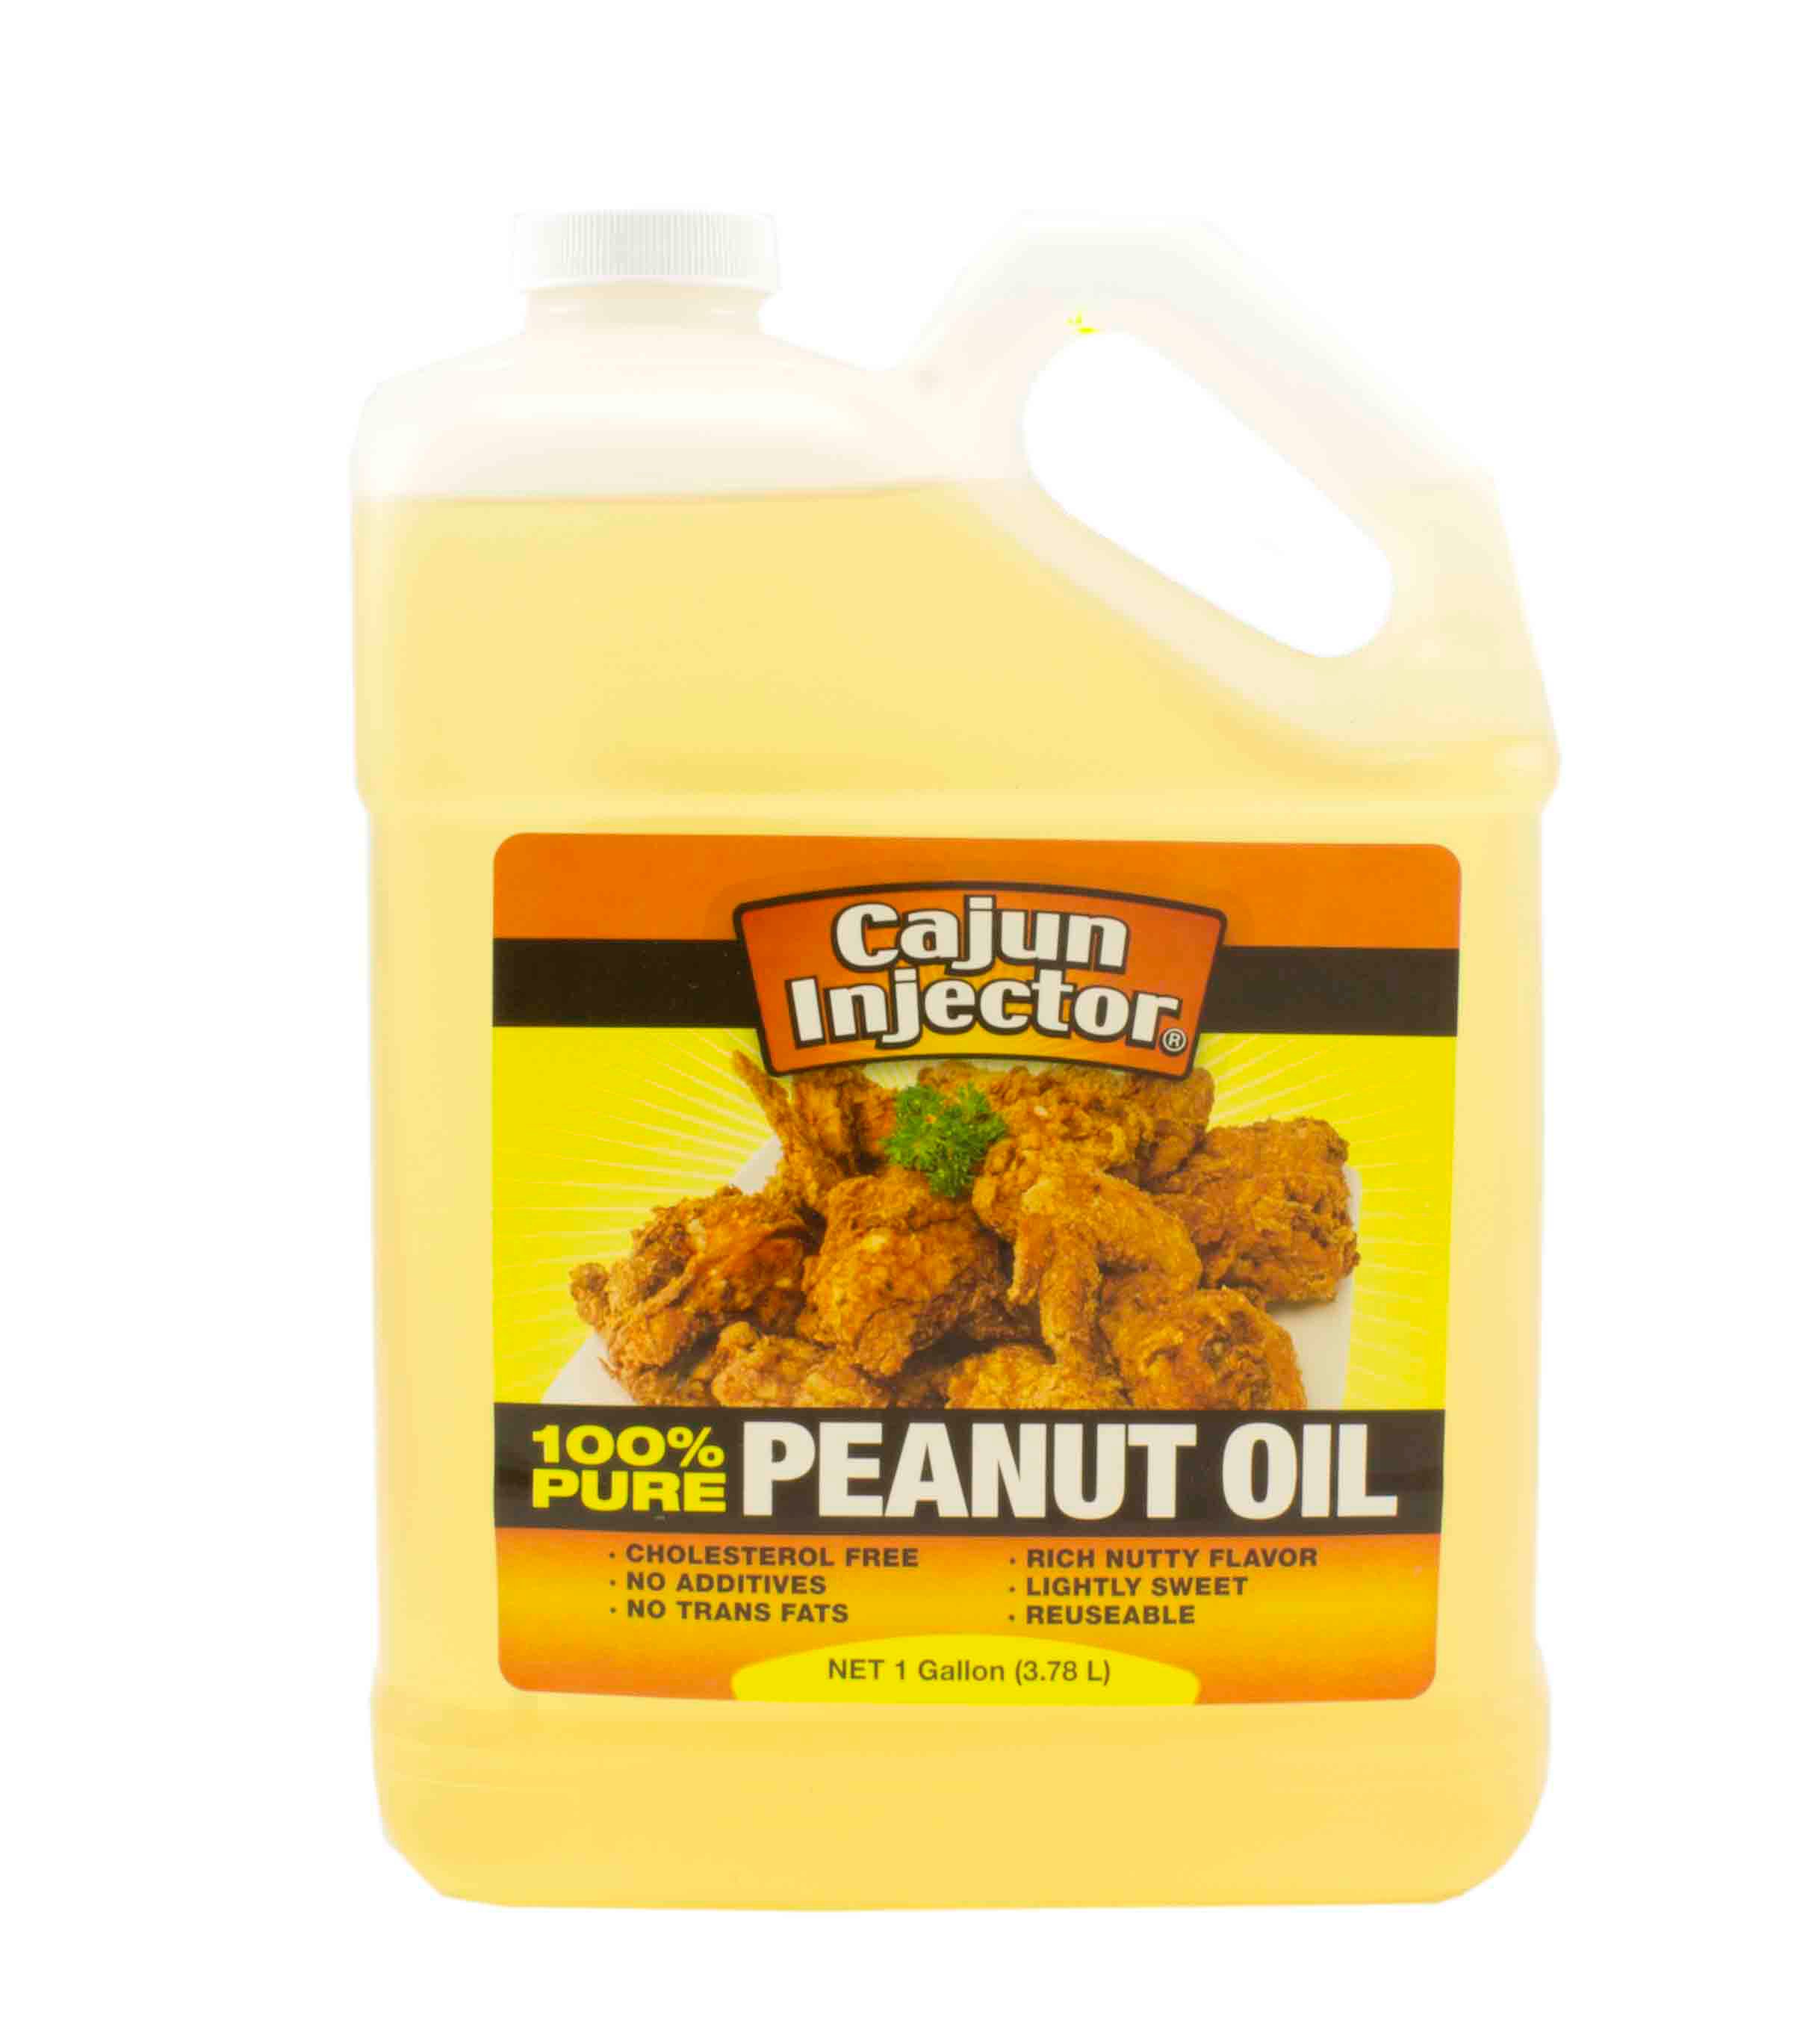 What is the flashpoint of peanut oil?